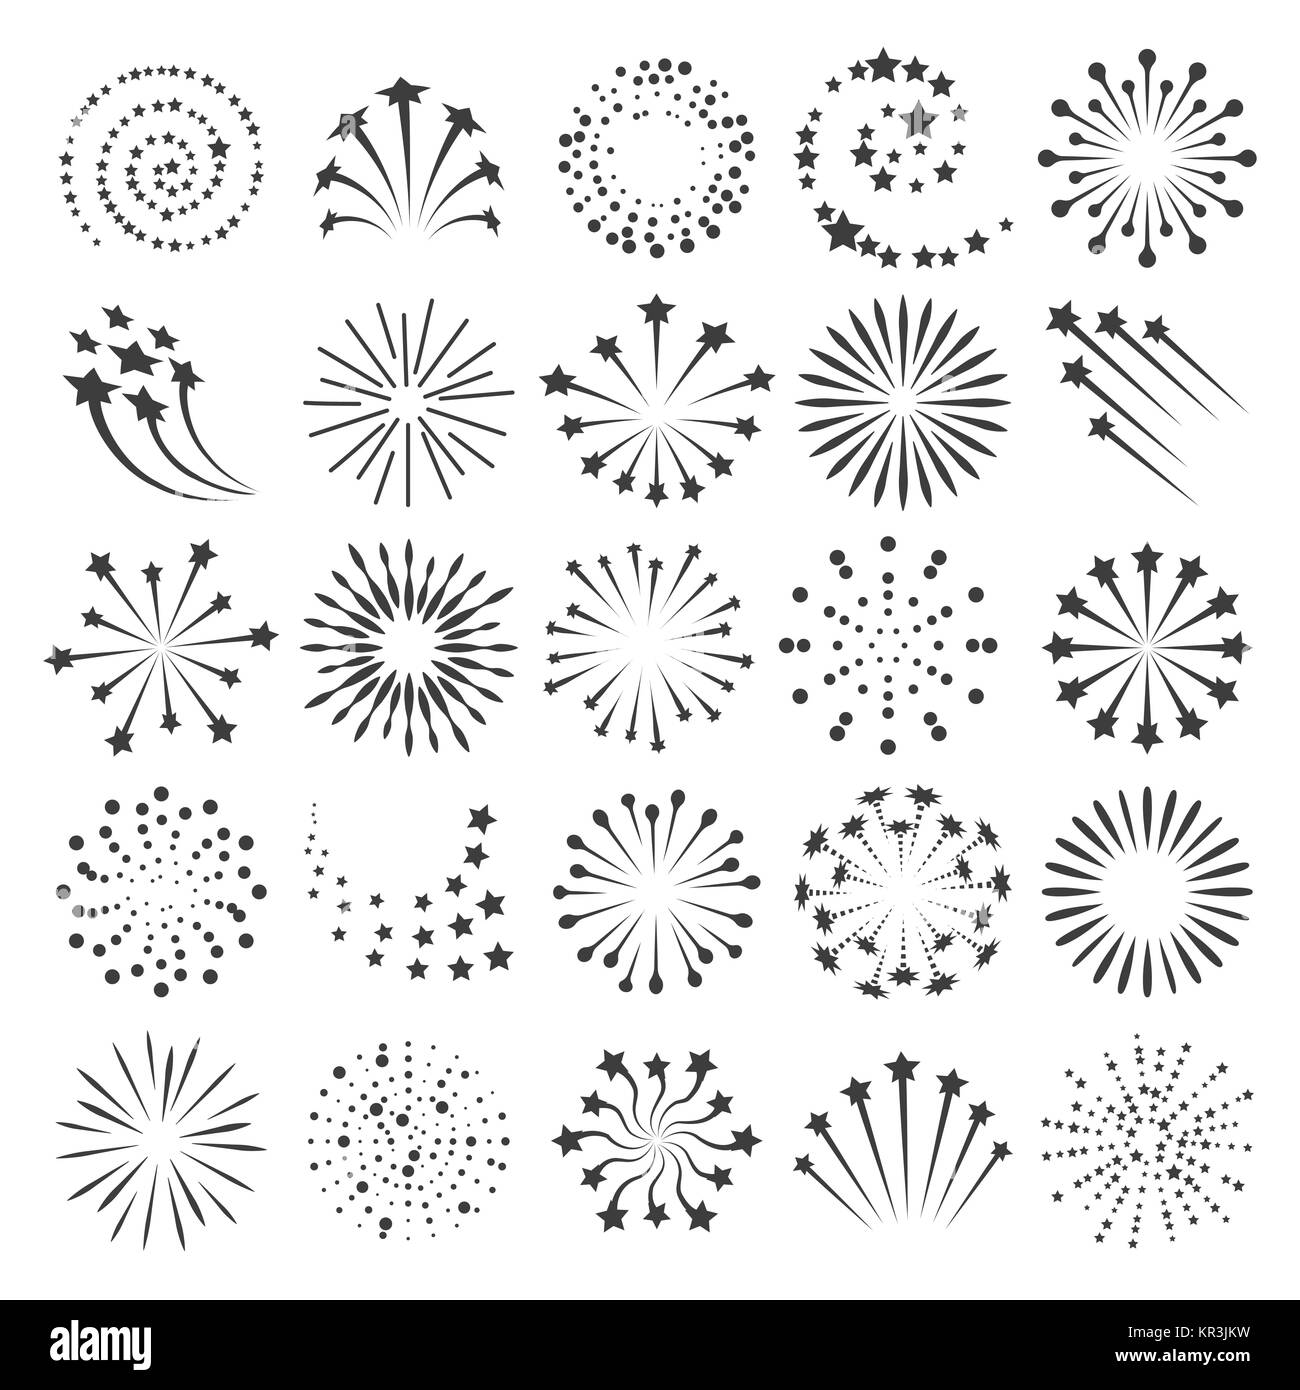 New year fireworks icons. Firework icon set for happy christmas celebrate party and birthday or anniversary events collection, vector illustration Stock Vector